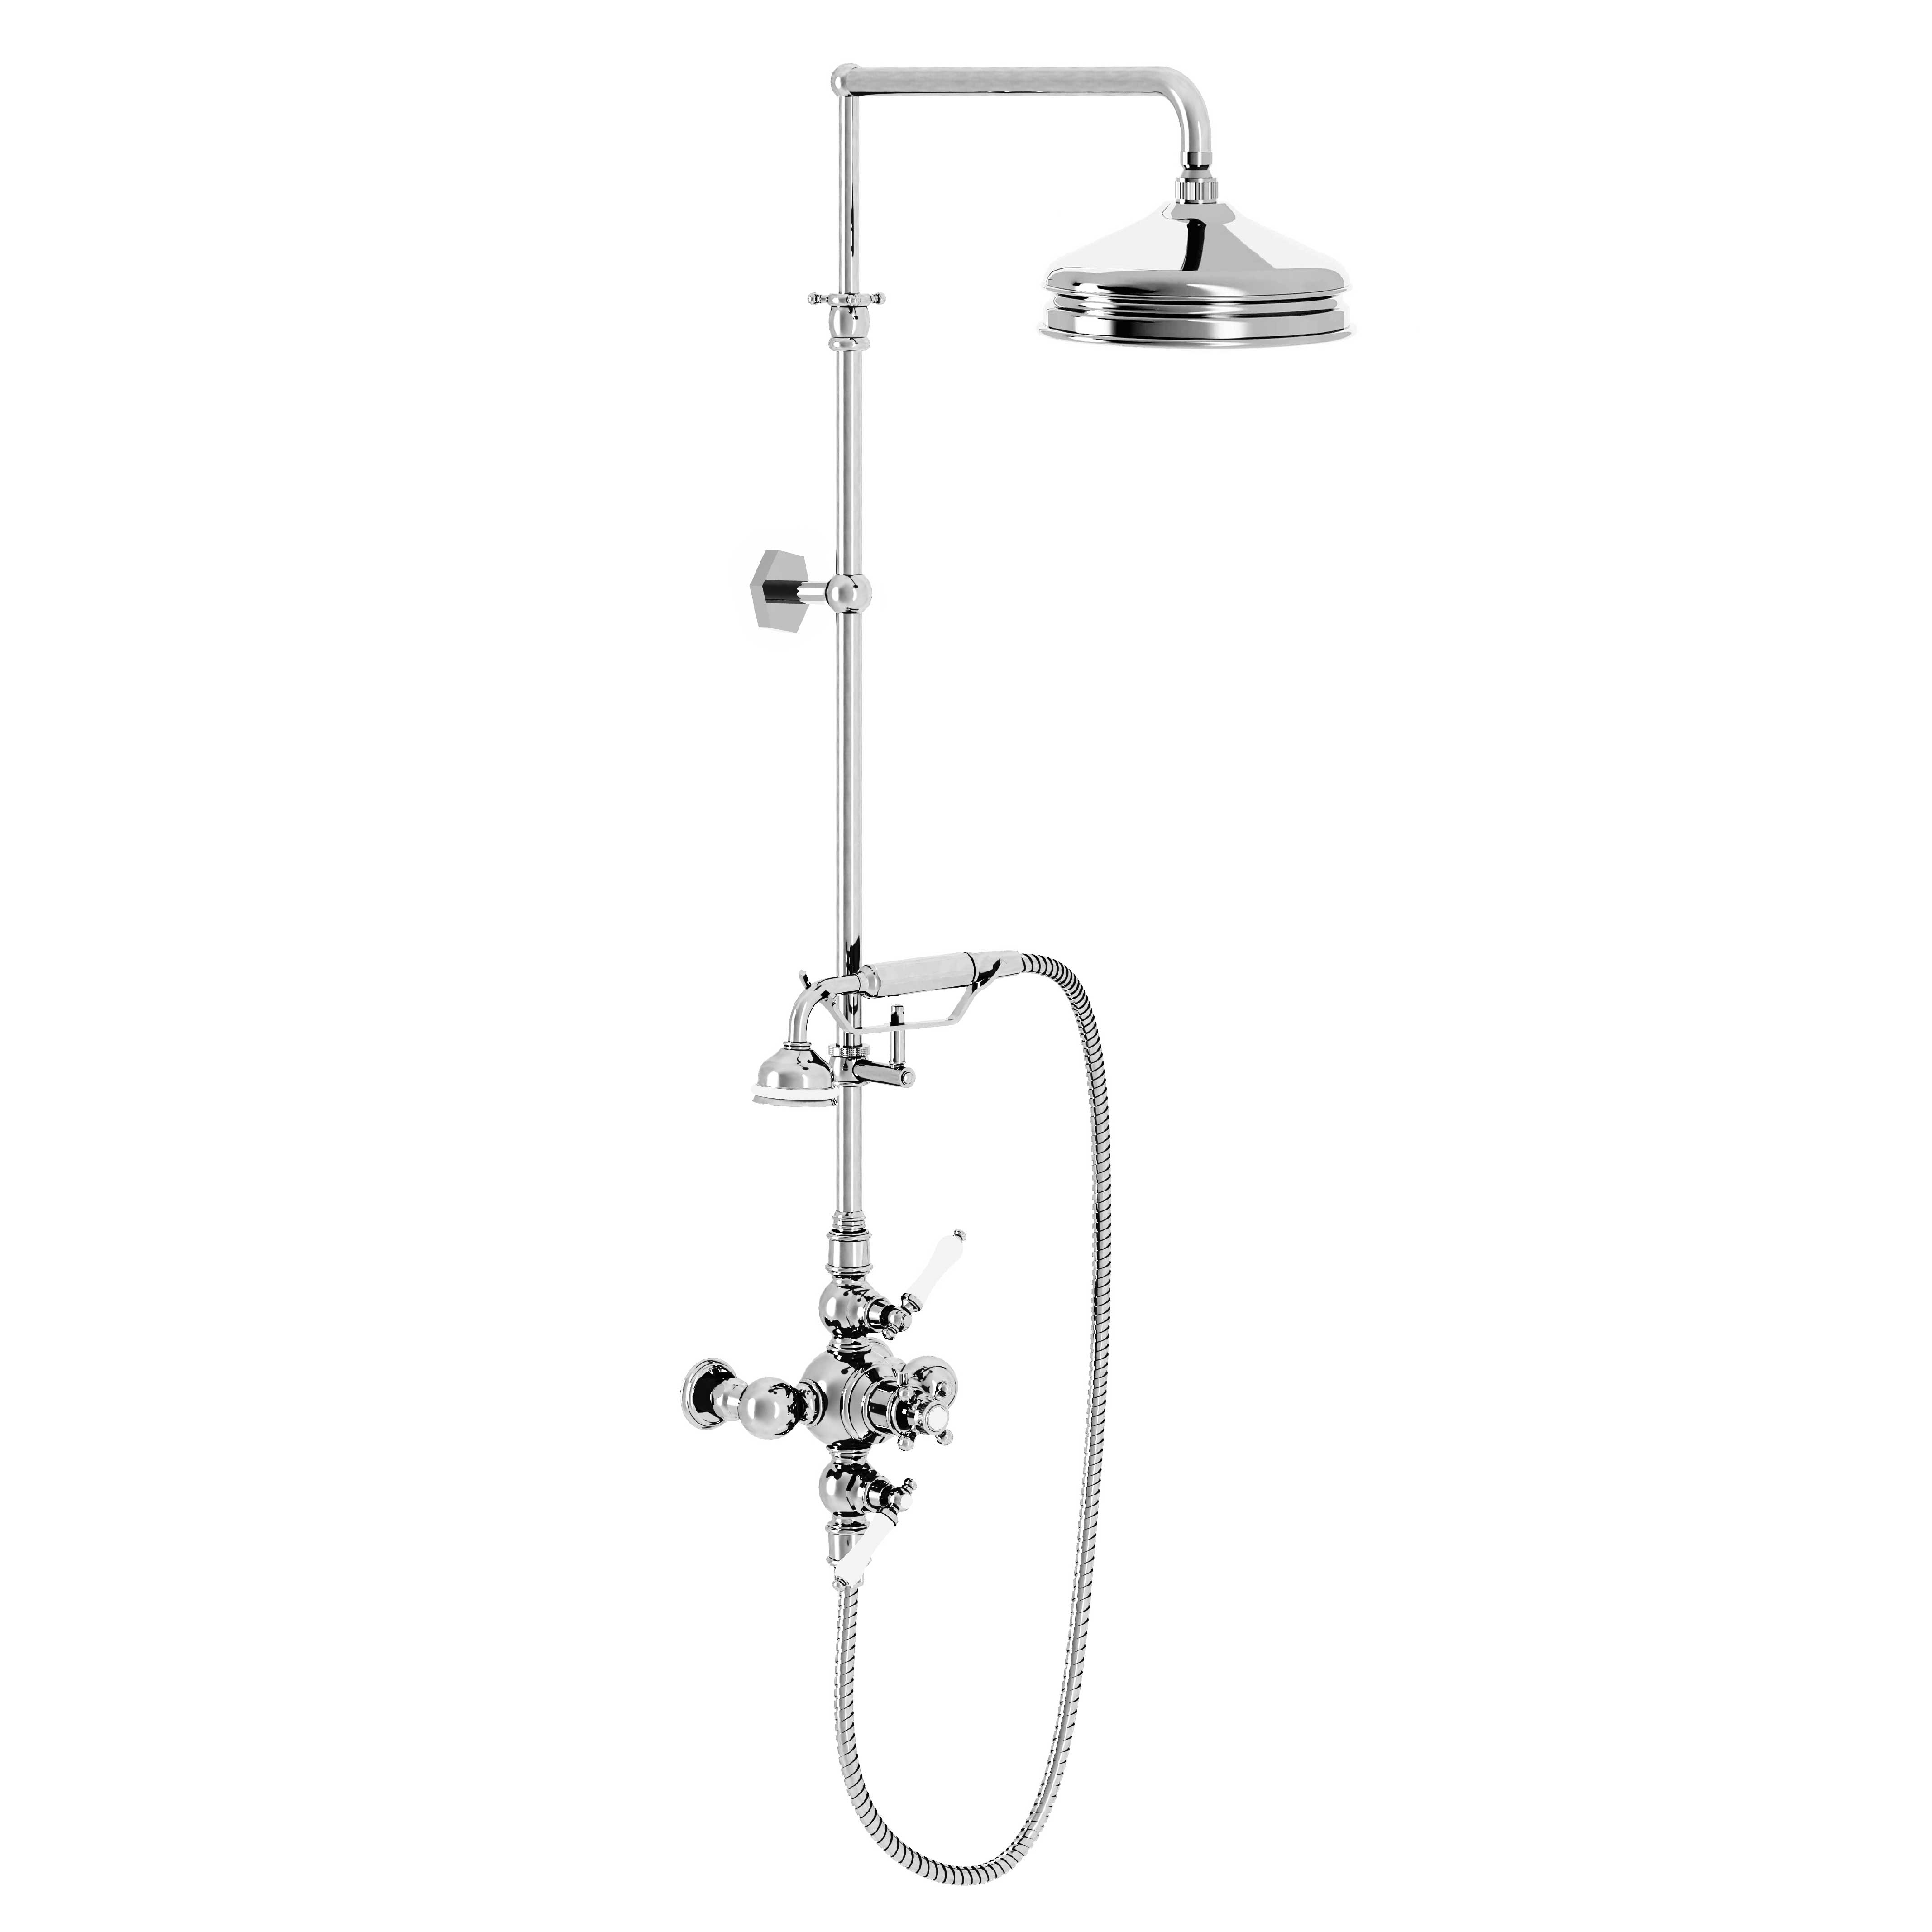 M30-2204T Thermo. shower mixer with column, anti-scaling